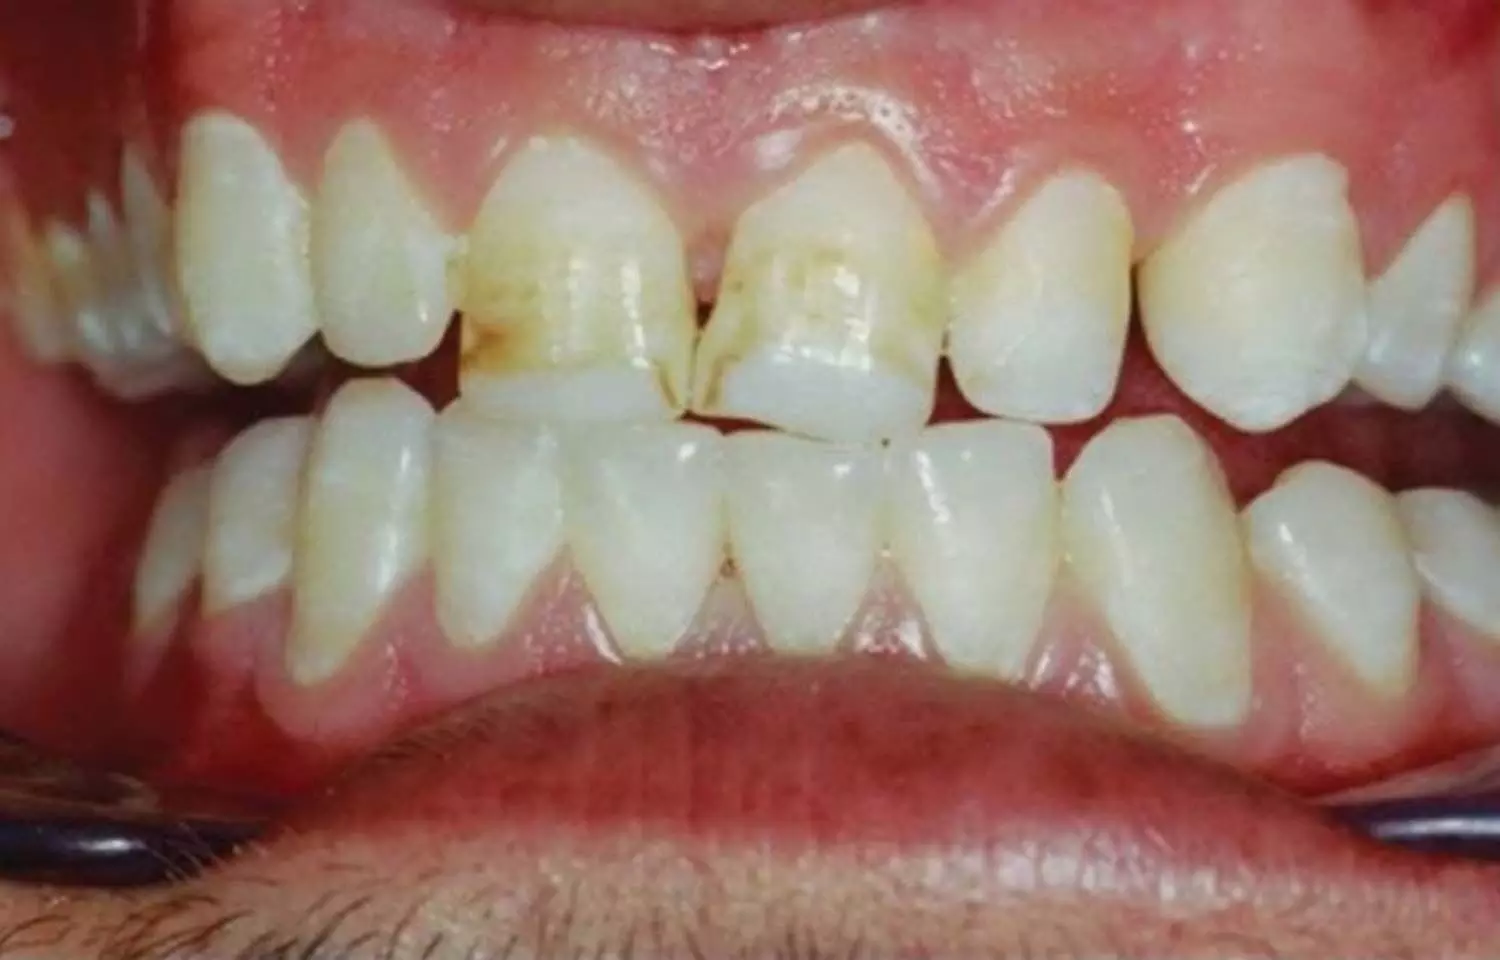 Oral bacterial community changes tied to severe dental fluorosis, Study says